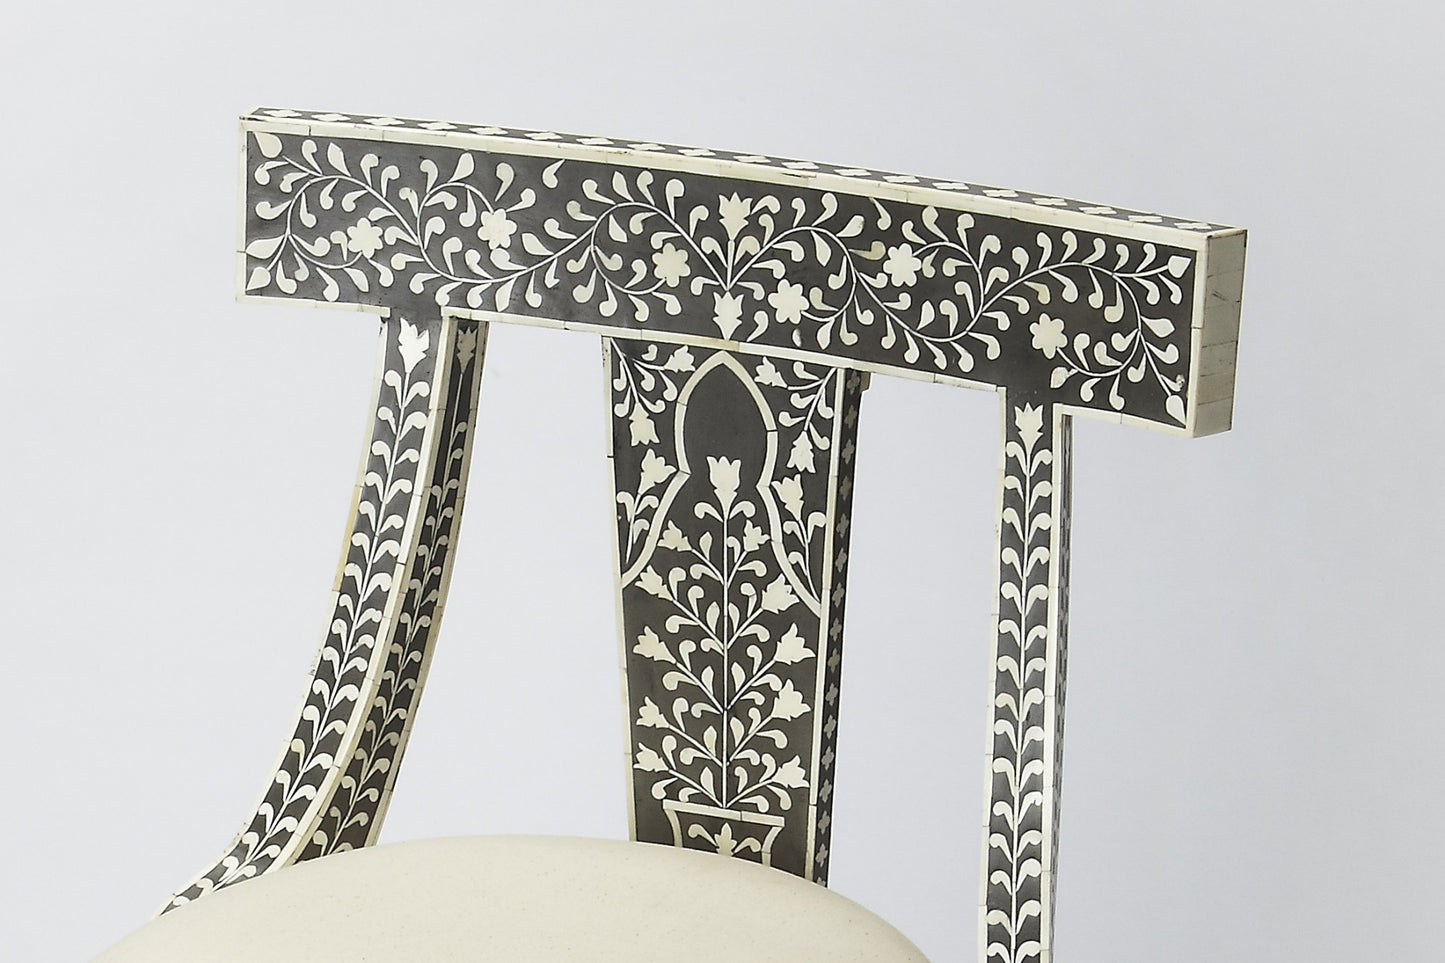 Black Bone Inlay Accent Chair By Homeroots